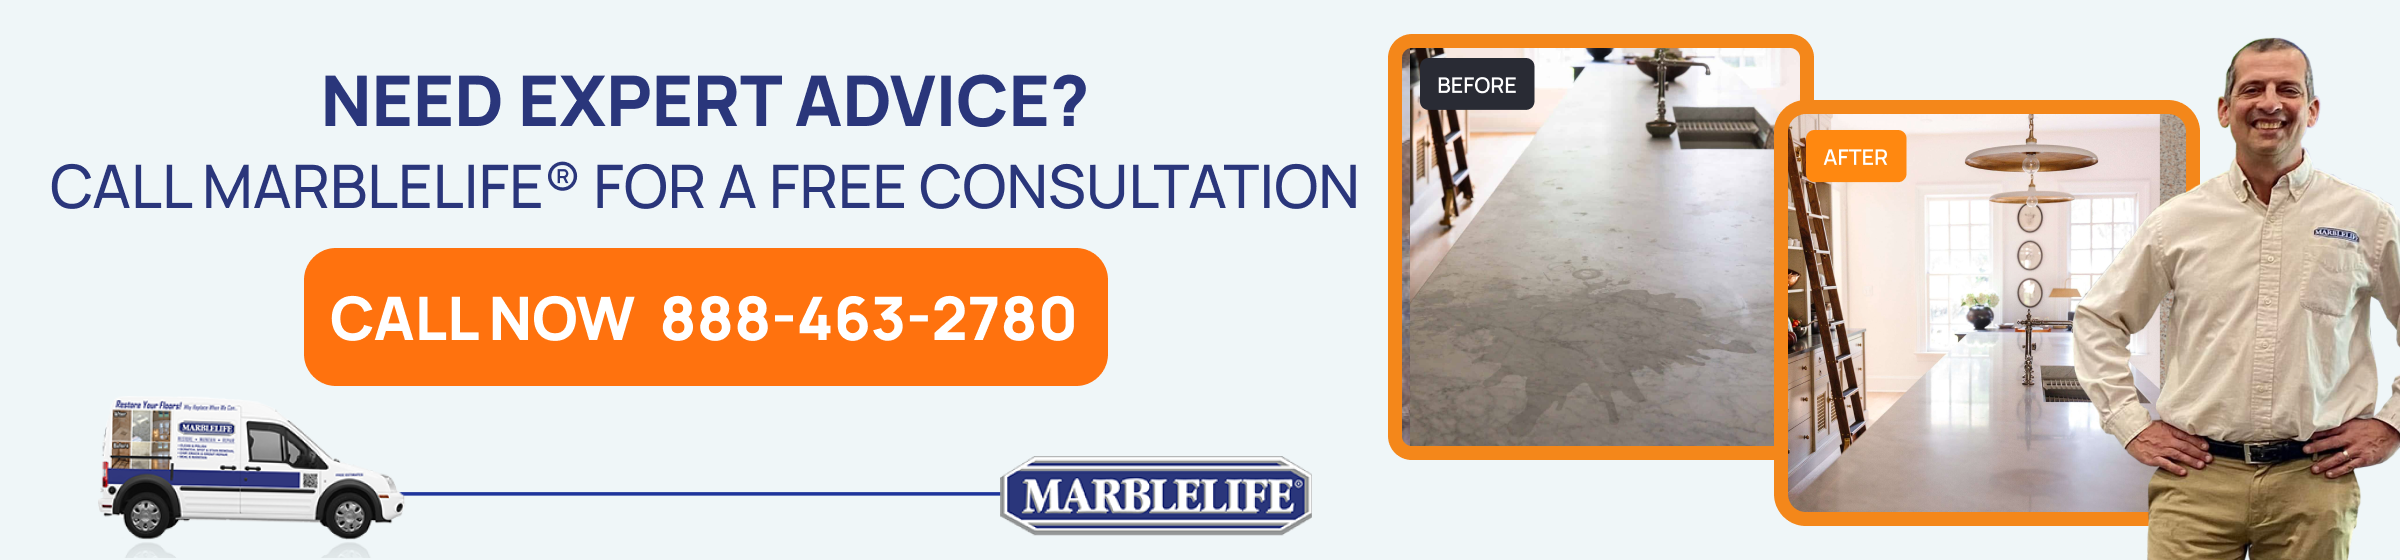 MARBLELIFE FREE CONSULTATION PHONE NUMBER